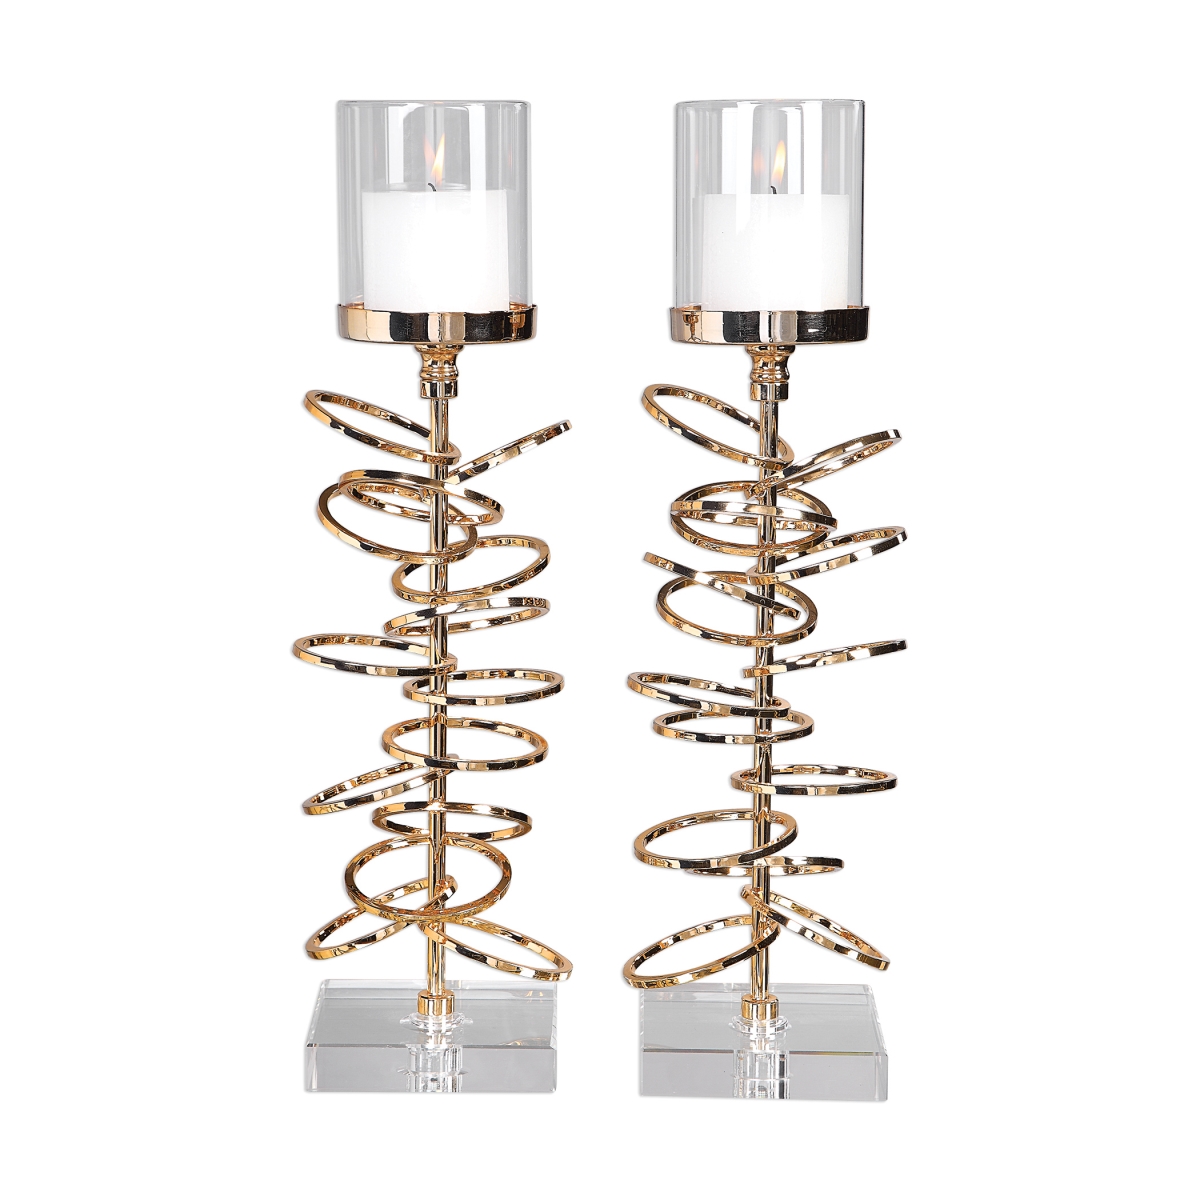 Picture of 212 Main 17517 Tala Rose Gold Candleholders - Set of 2